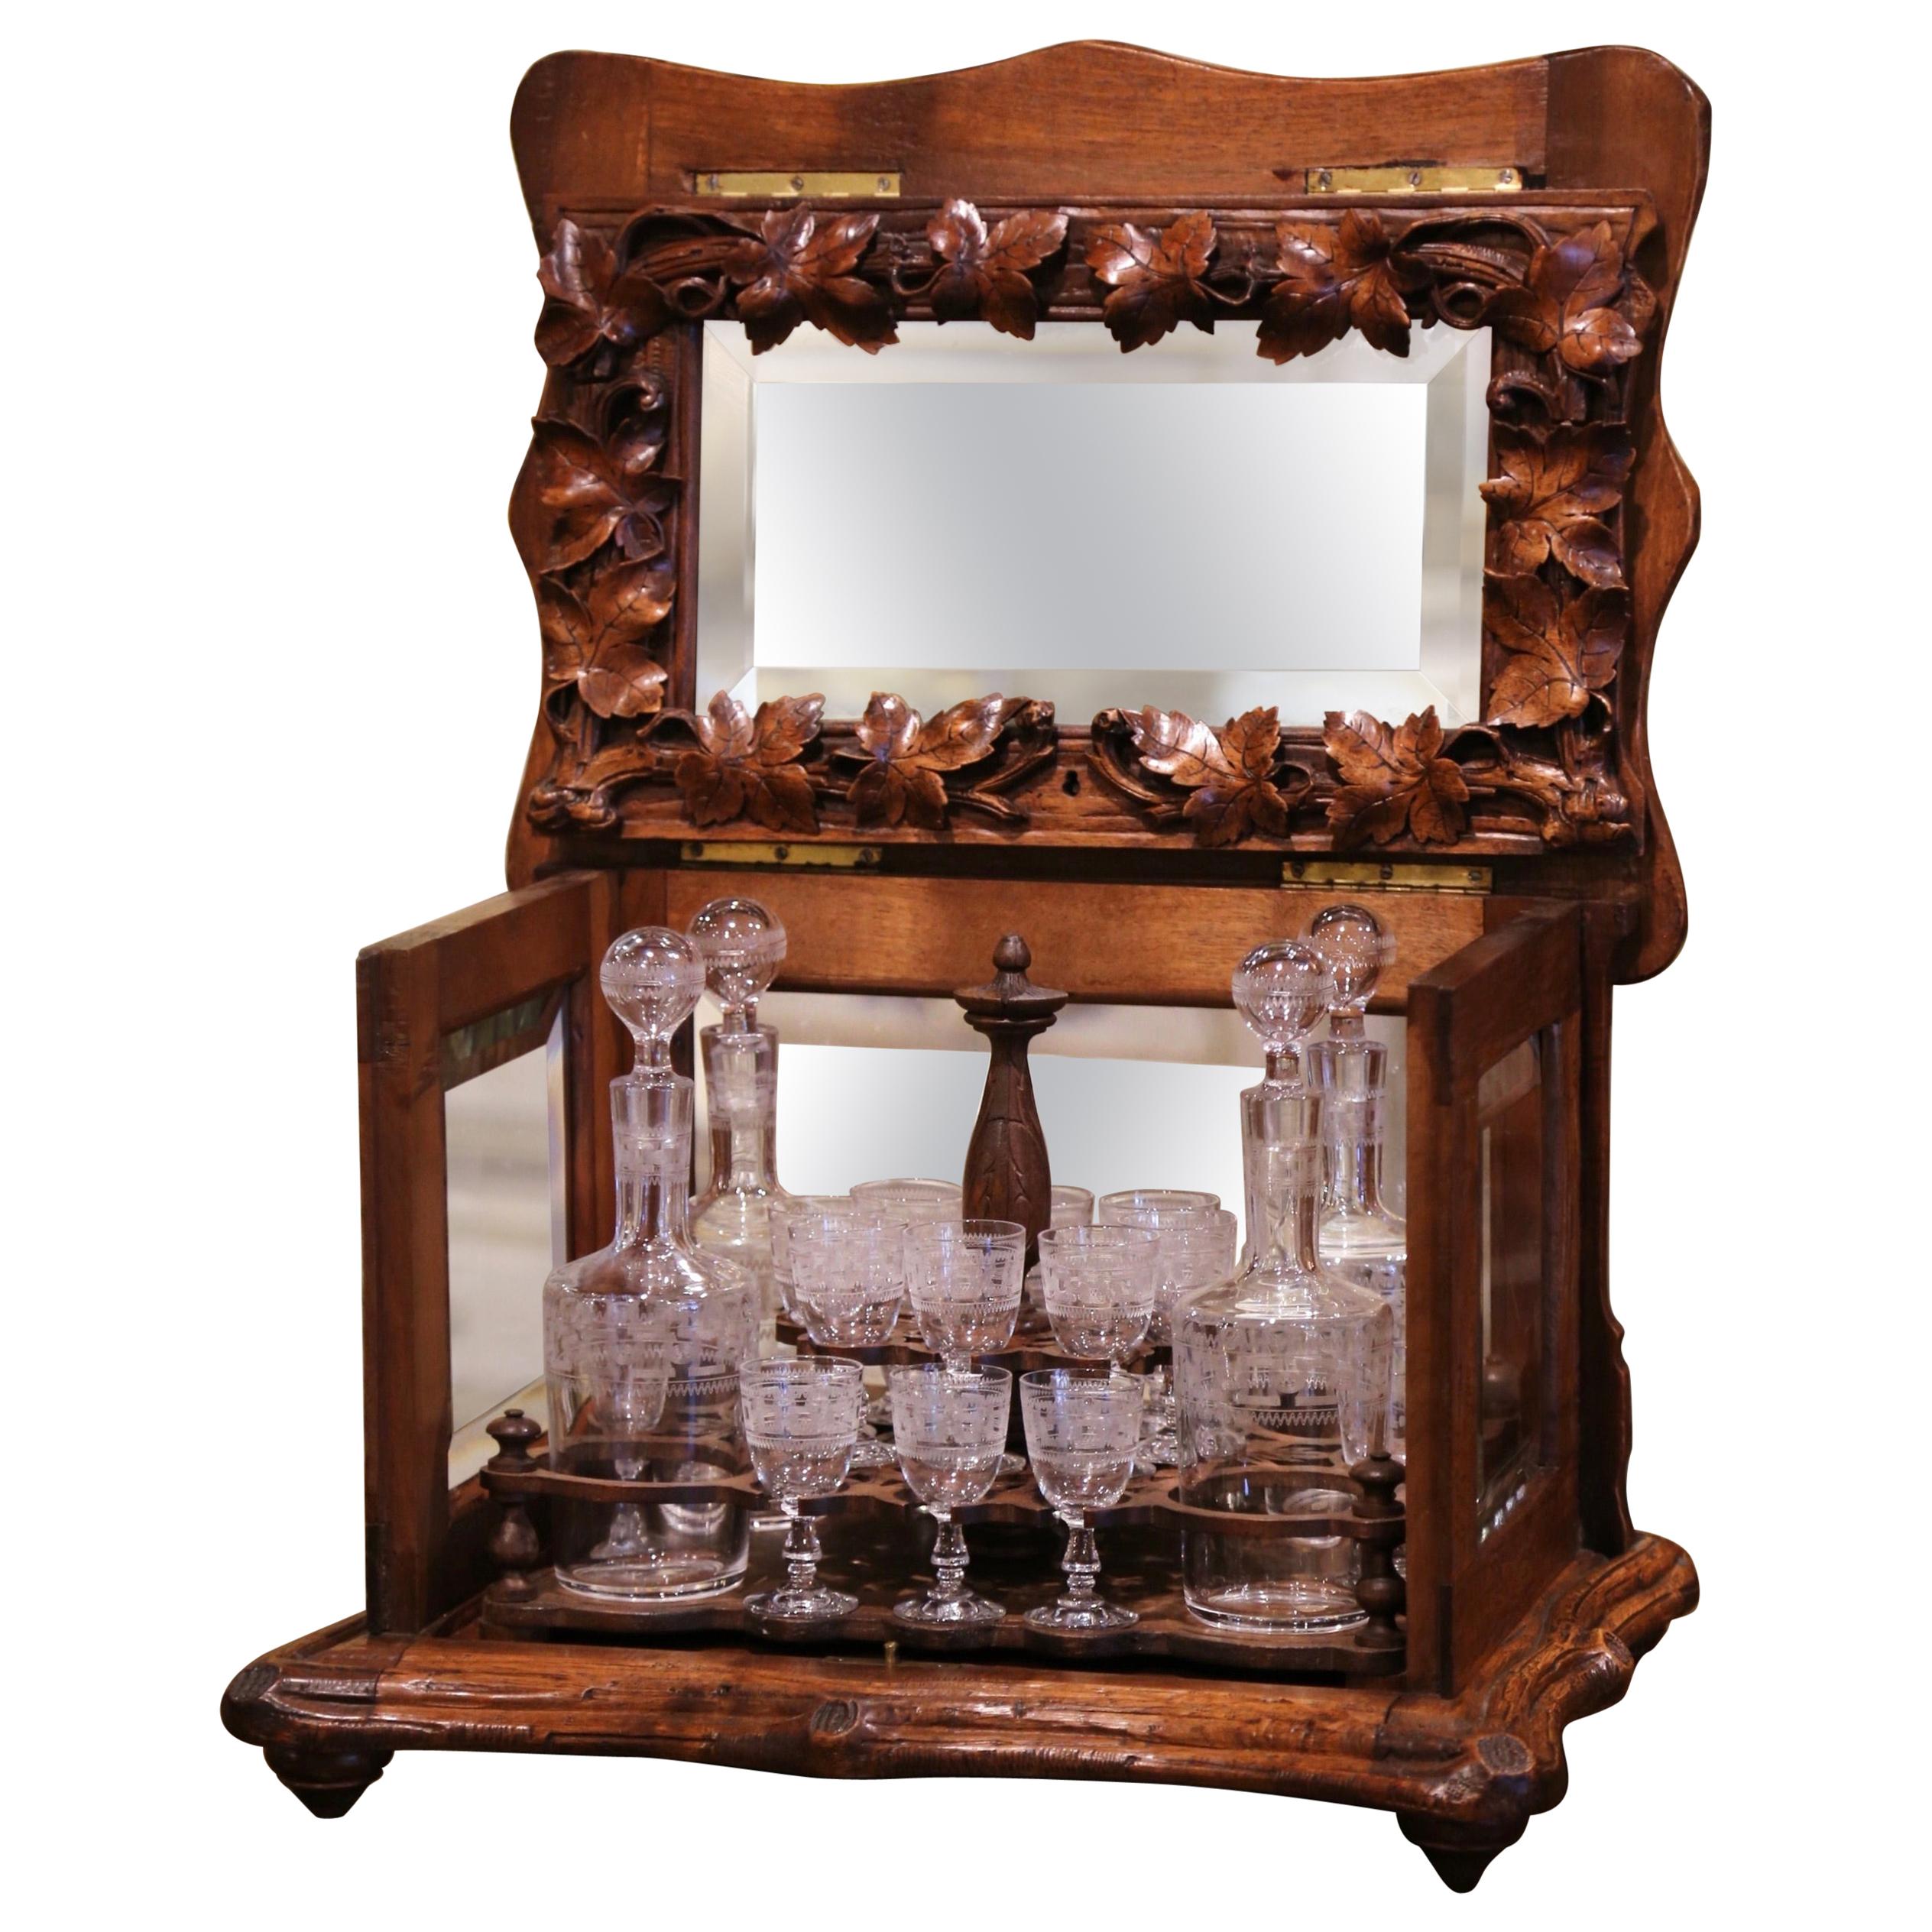 19th Century French Black Forest Carved Walnut and Glass Complete Liquor Box